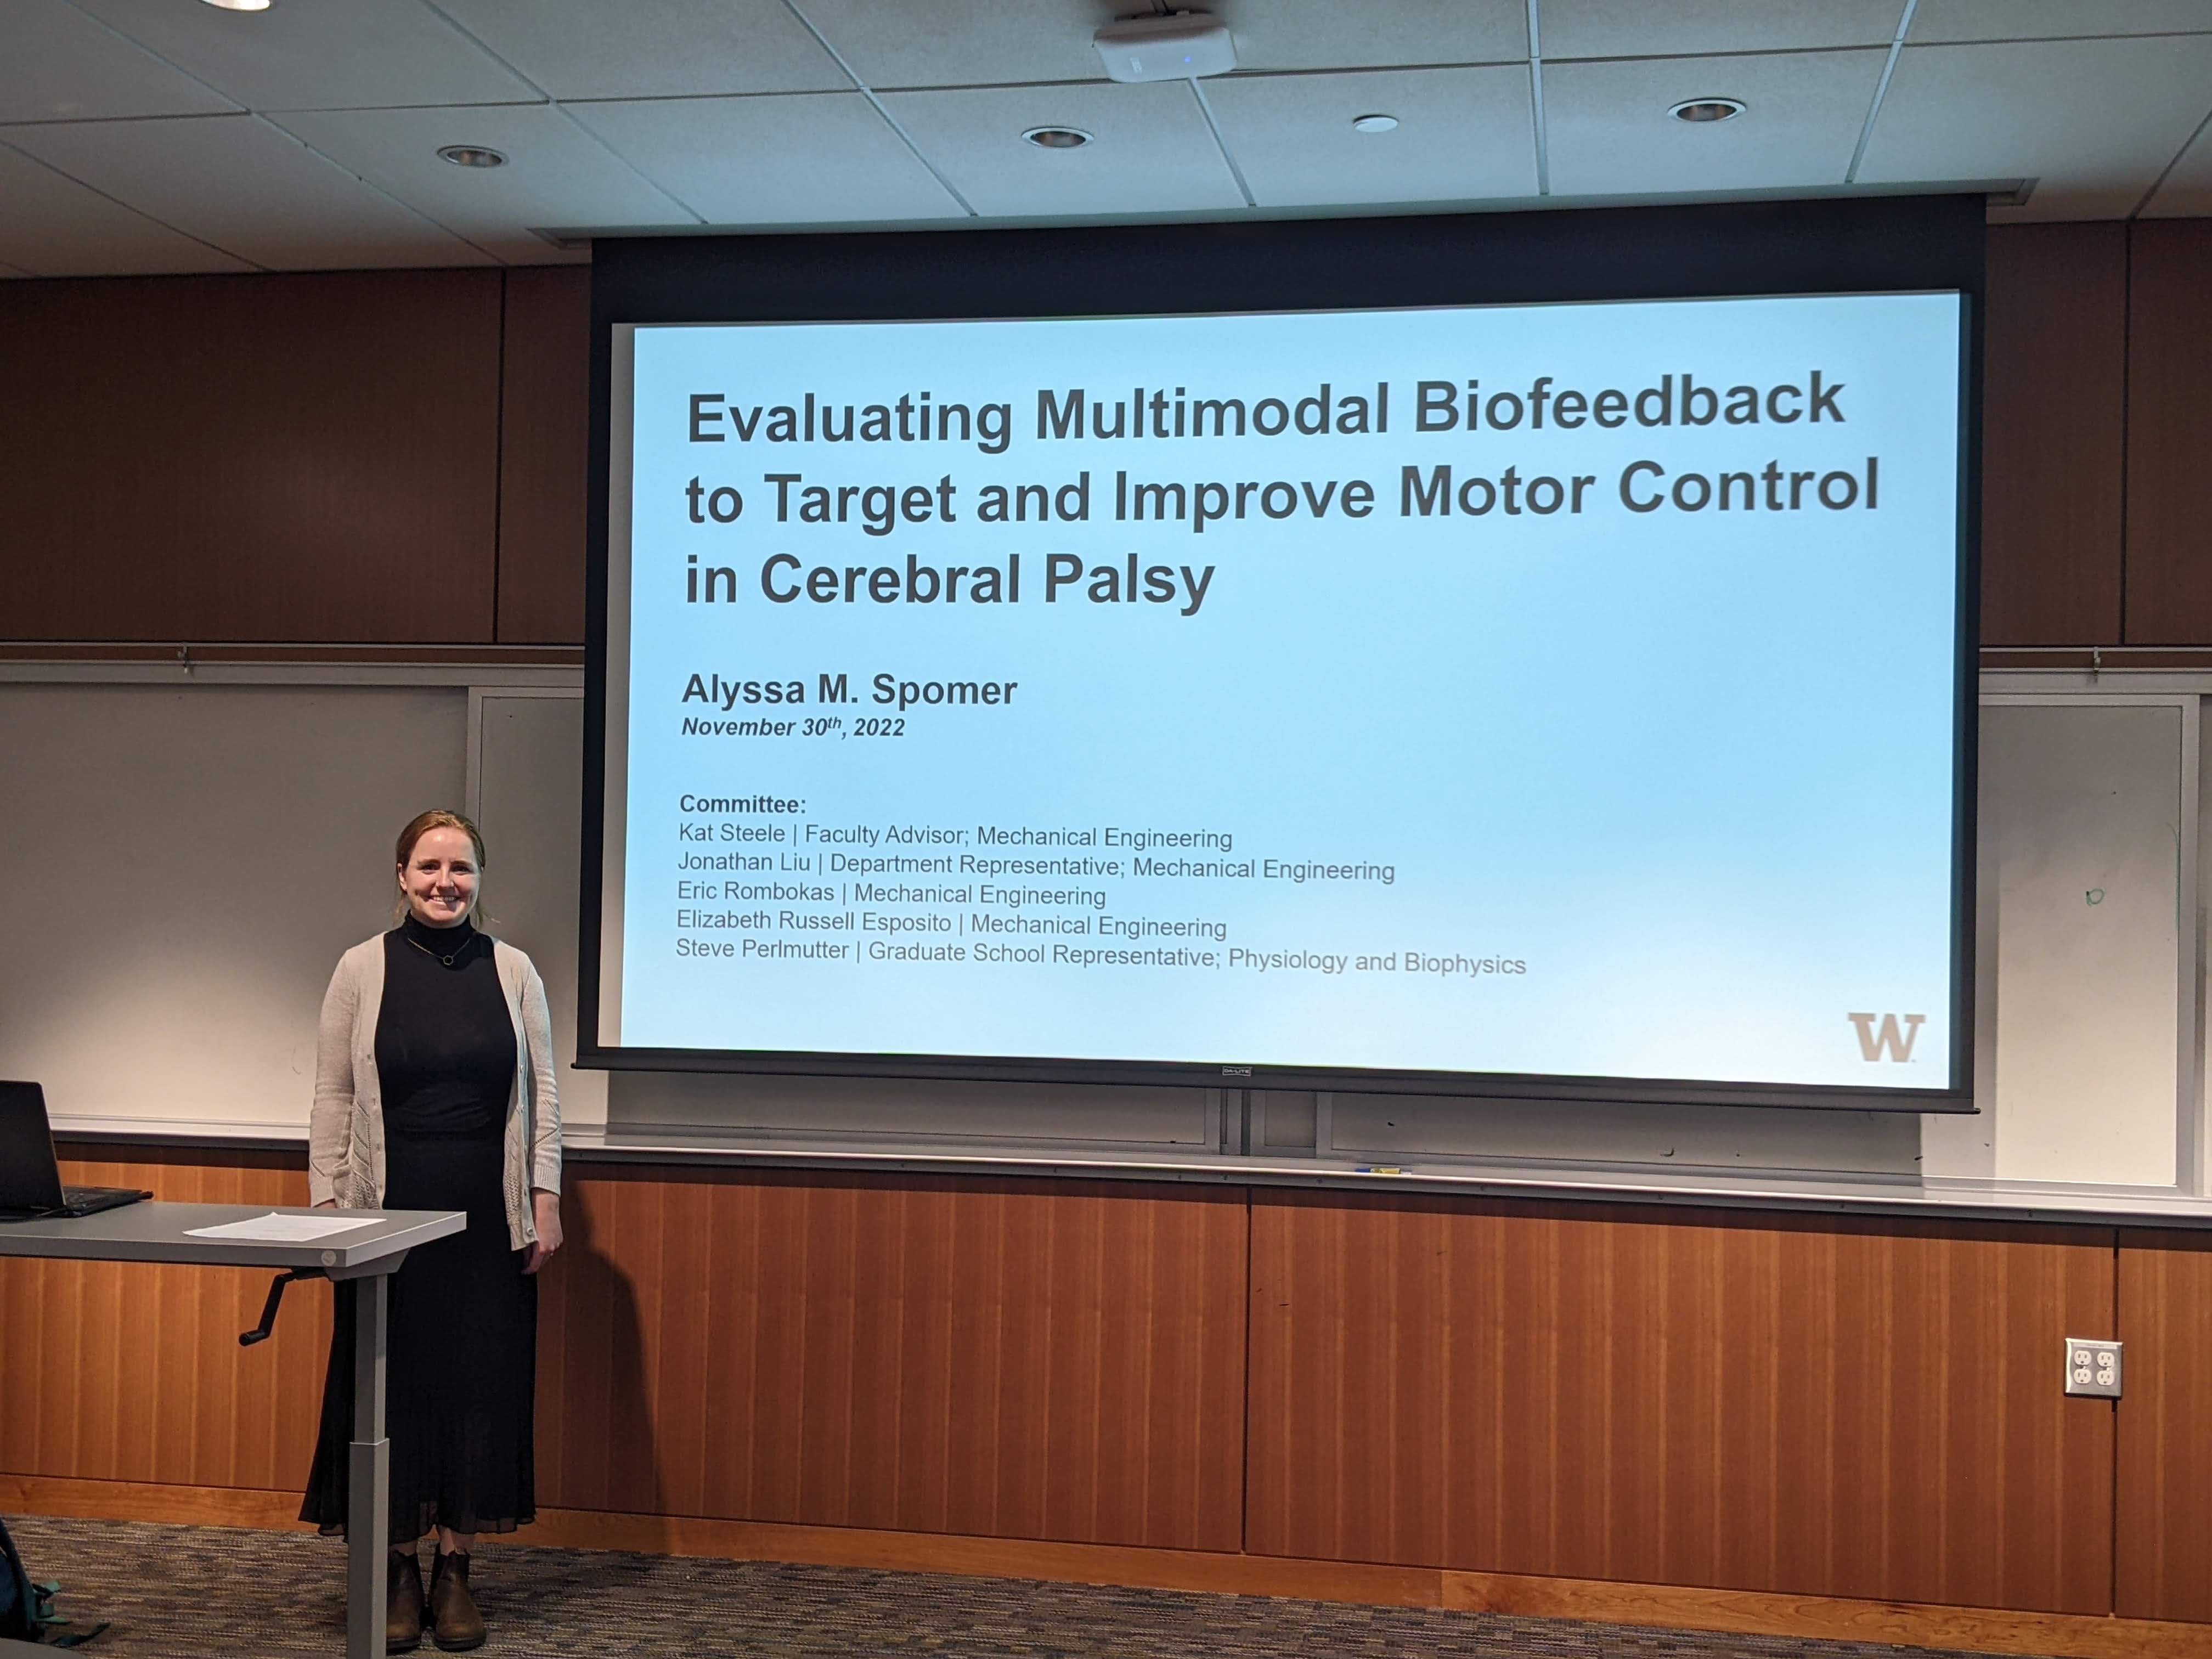 Alyssa is a white woman with red hair and is wearing a black dress and white sweater. She is smiling and standing next to a large projected screen with her dissertation title.